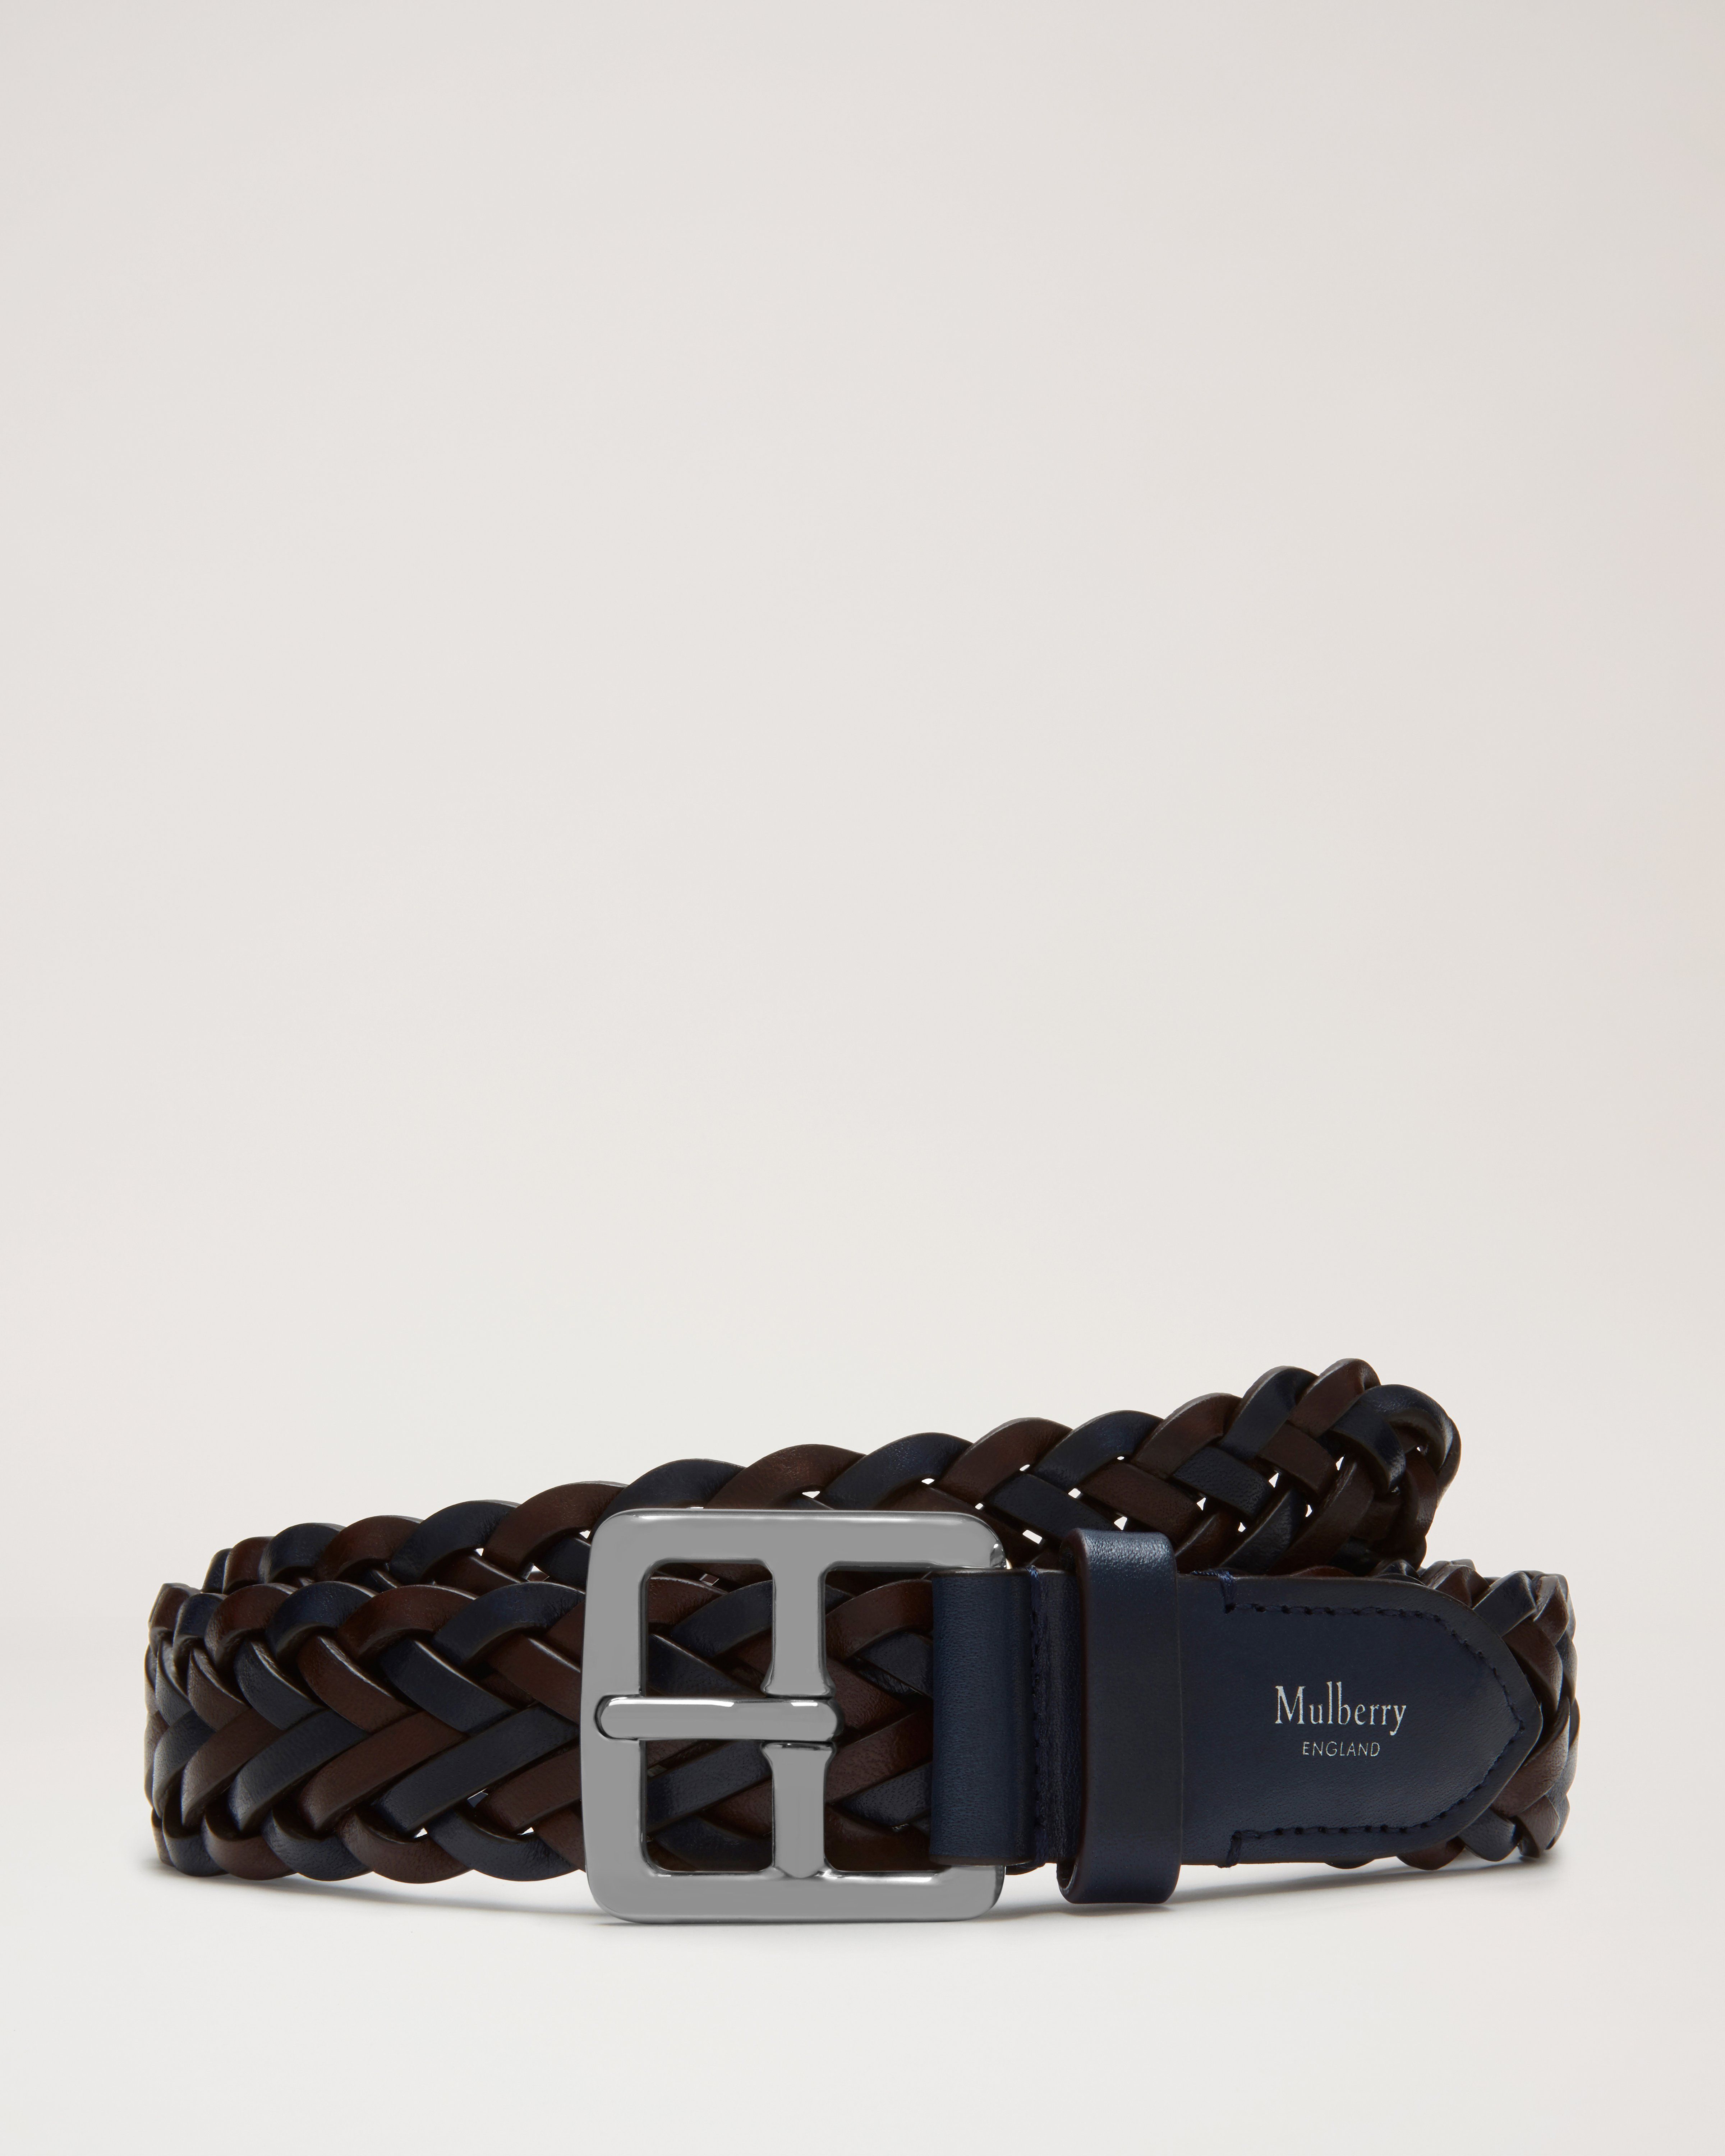 30mm Boho Buckle Braided Belt, Chocolate & Midnight Natural Leather, Men